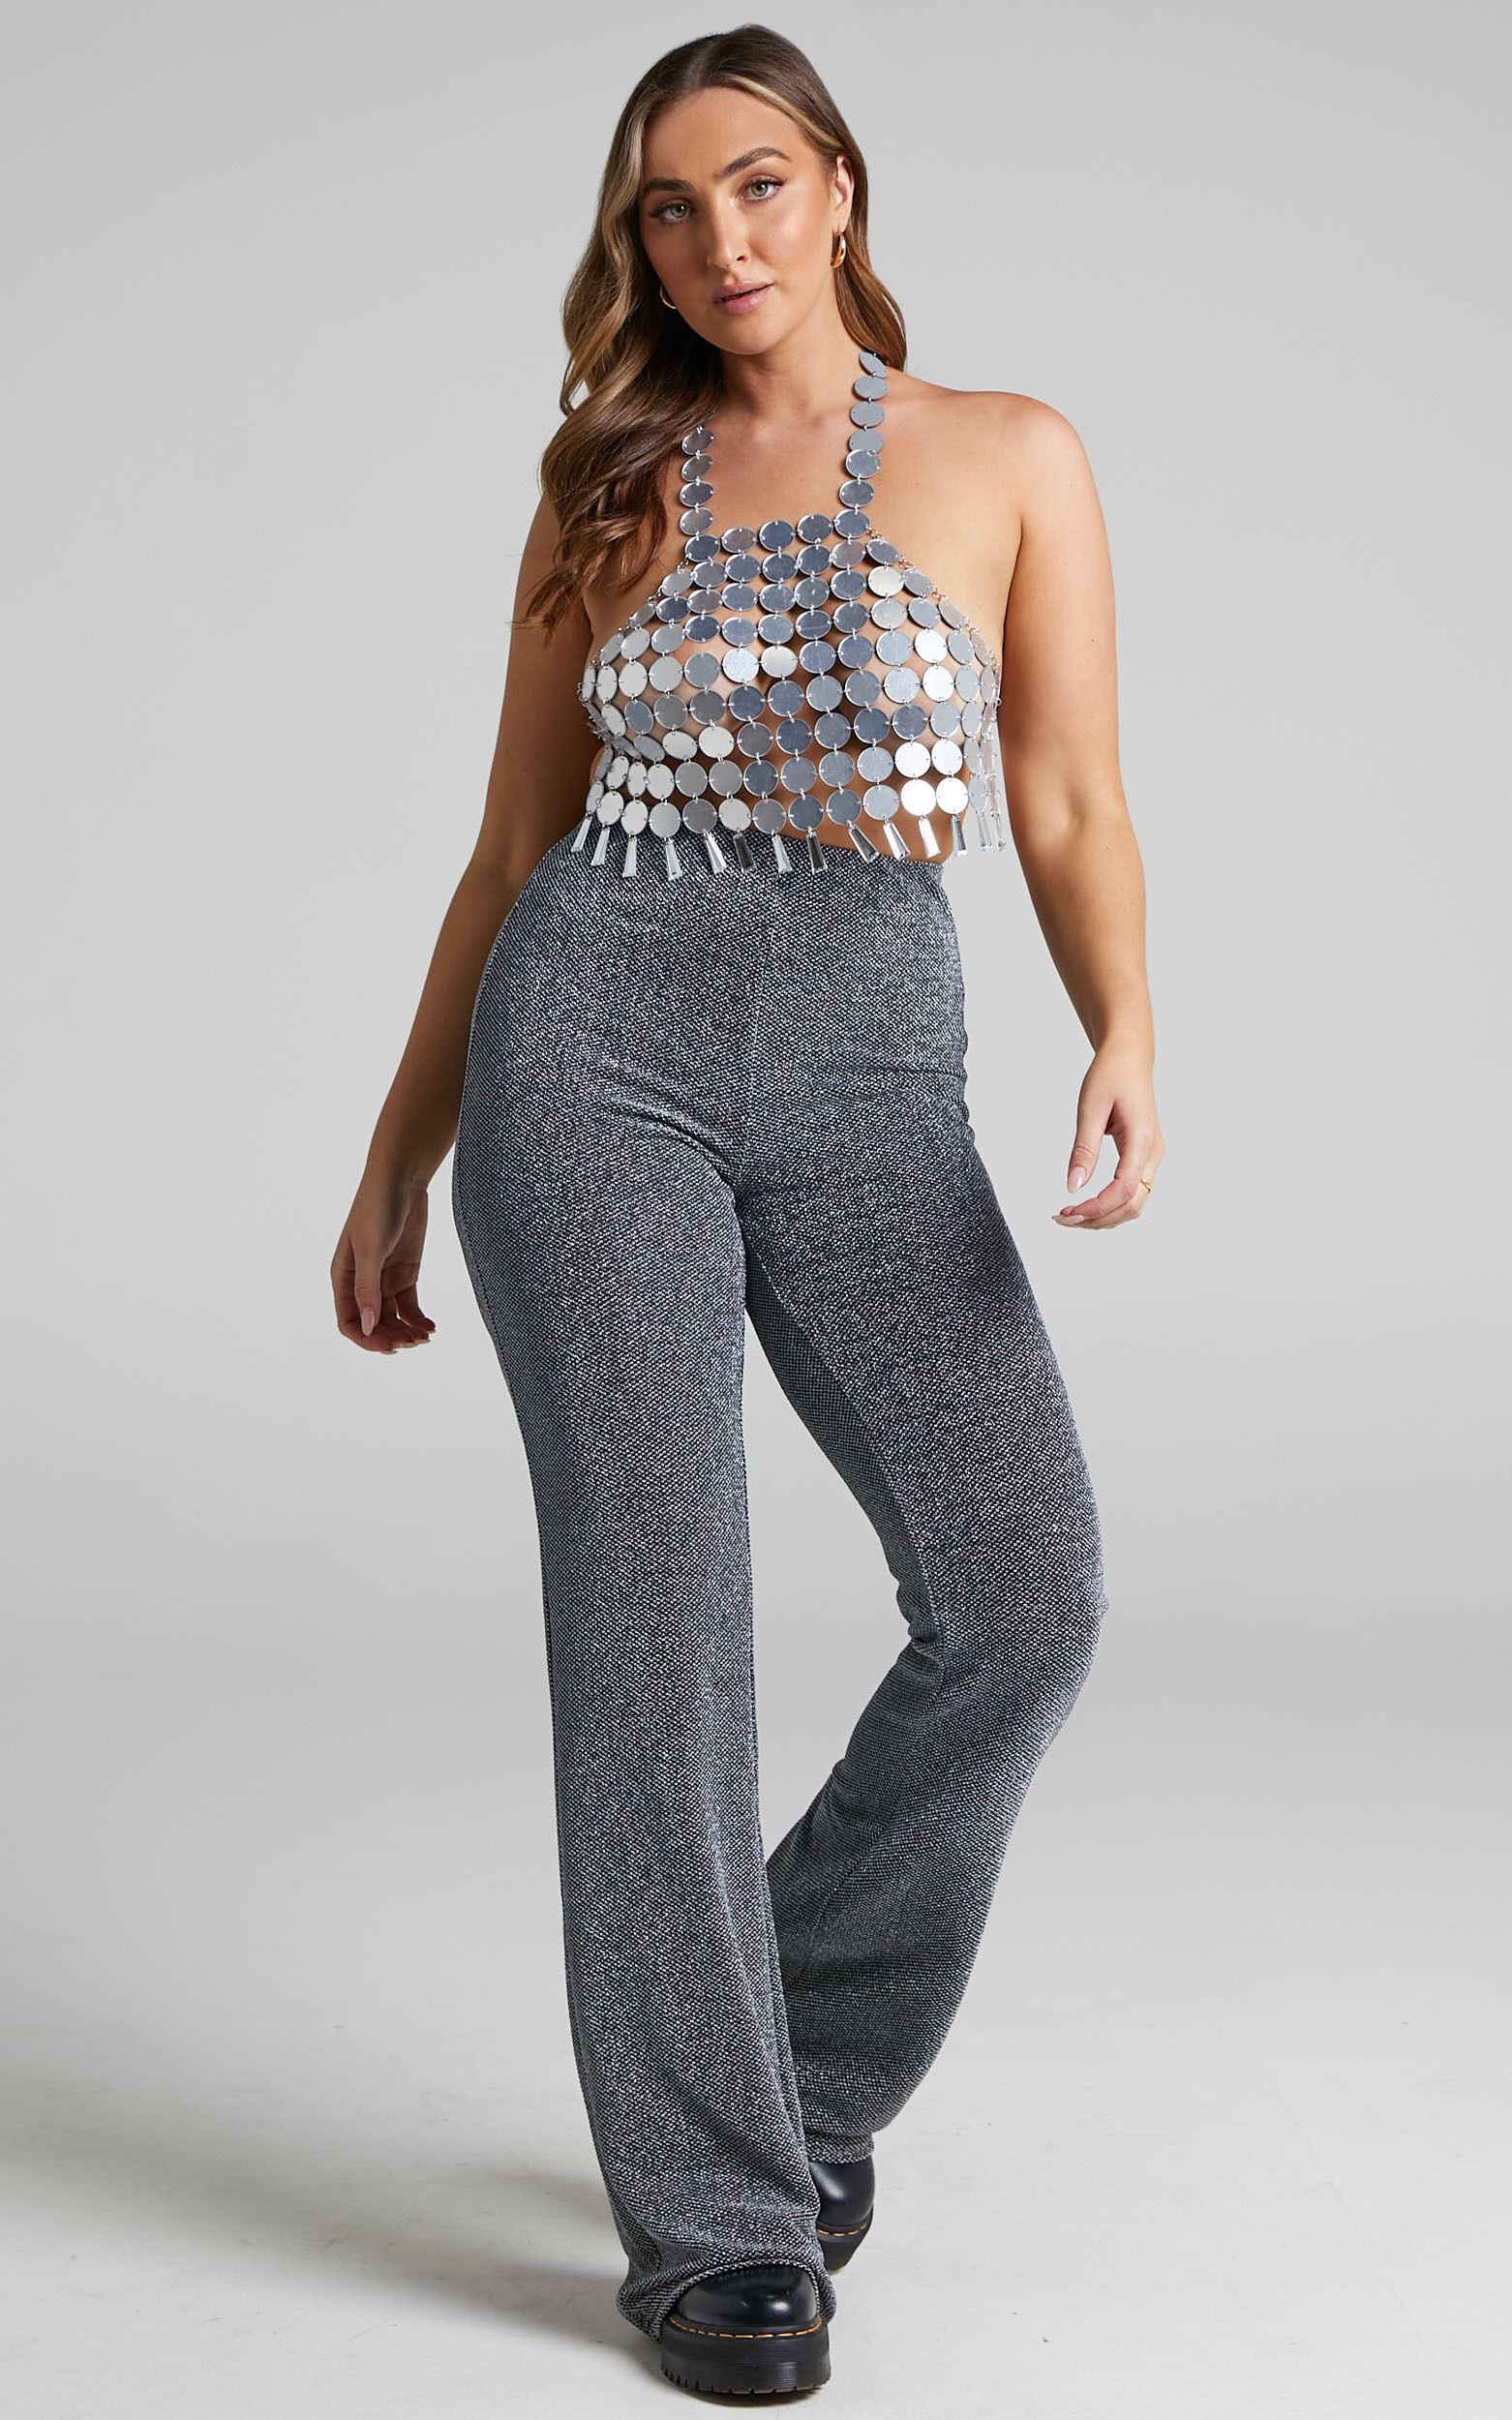 Visions Sequin Cropped Top in Silver - S/M, SLV2, super-hi-res image number null